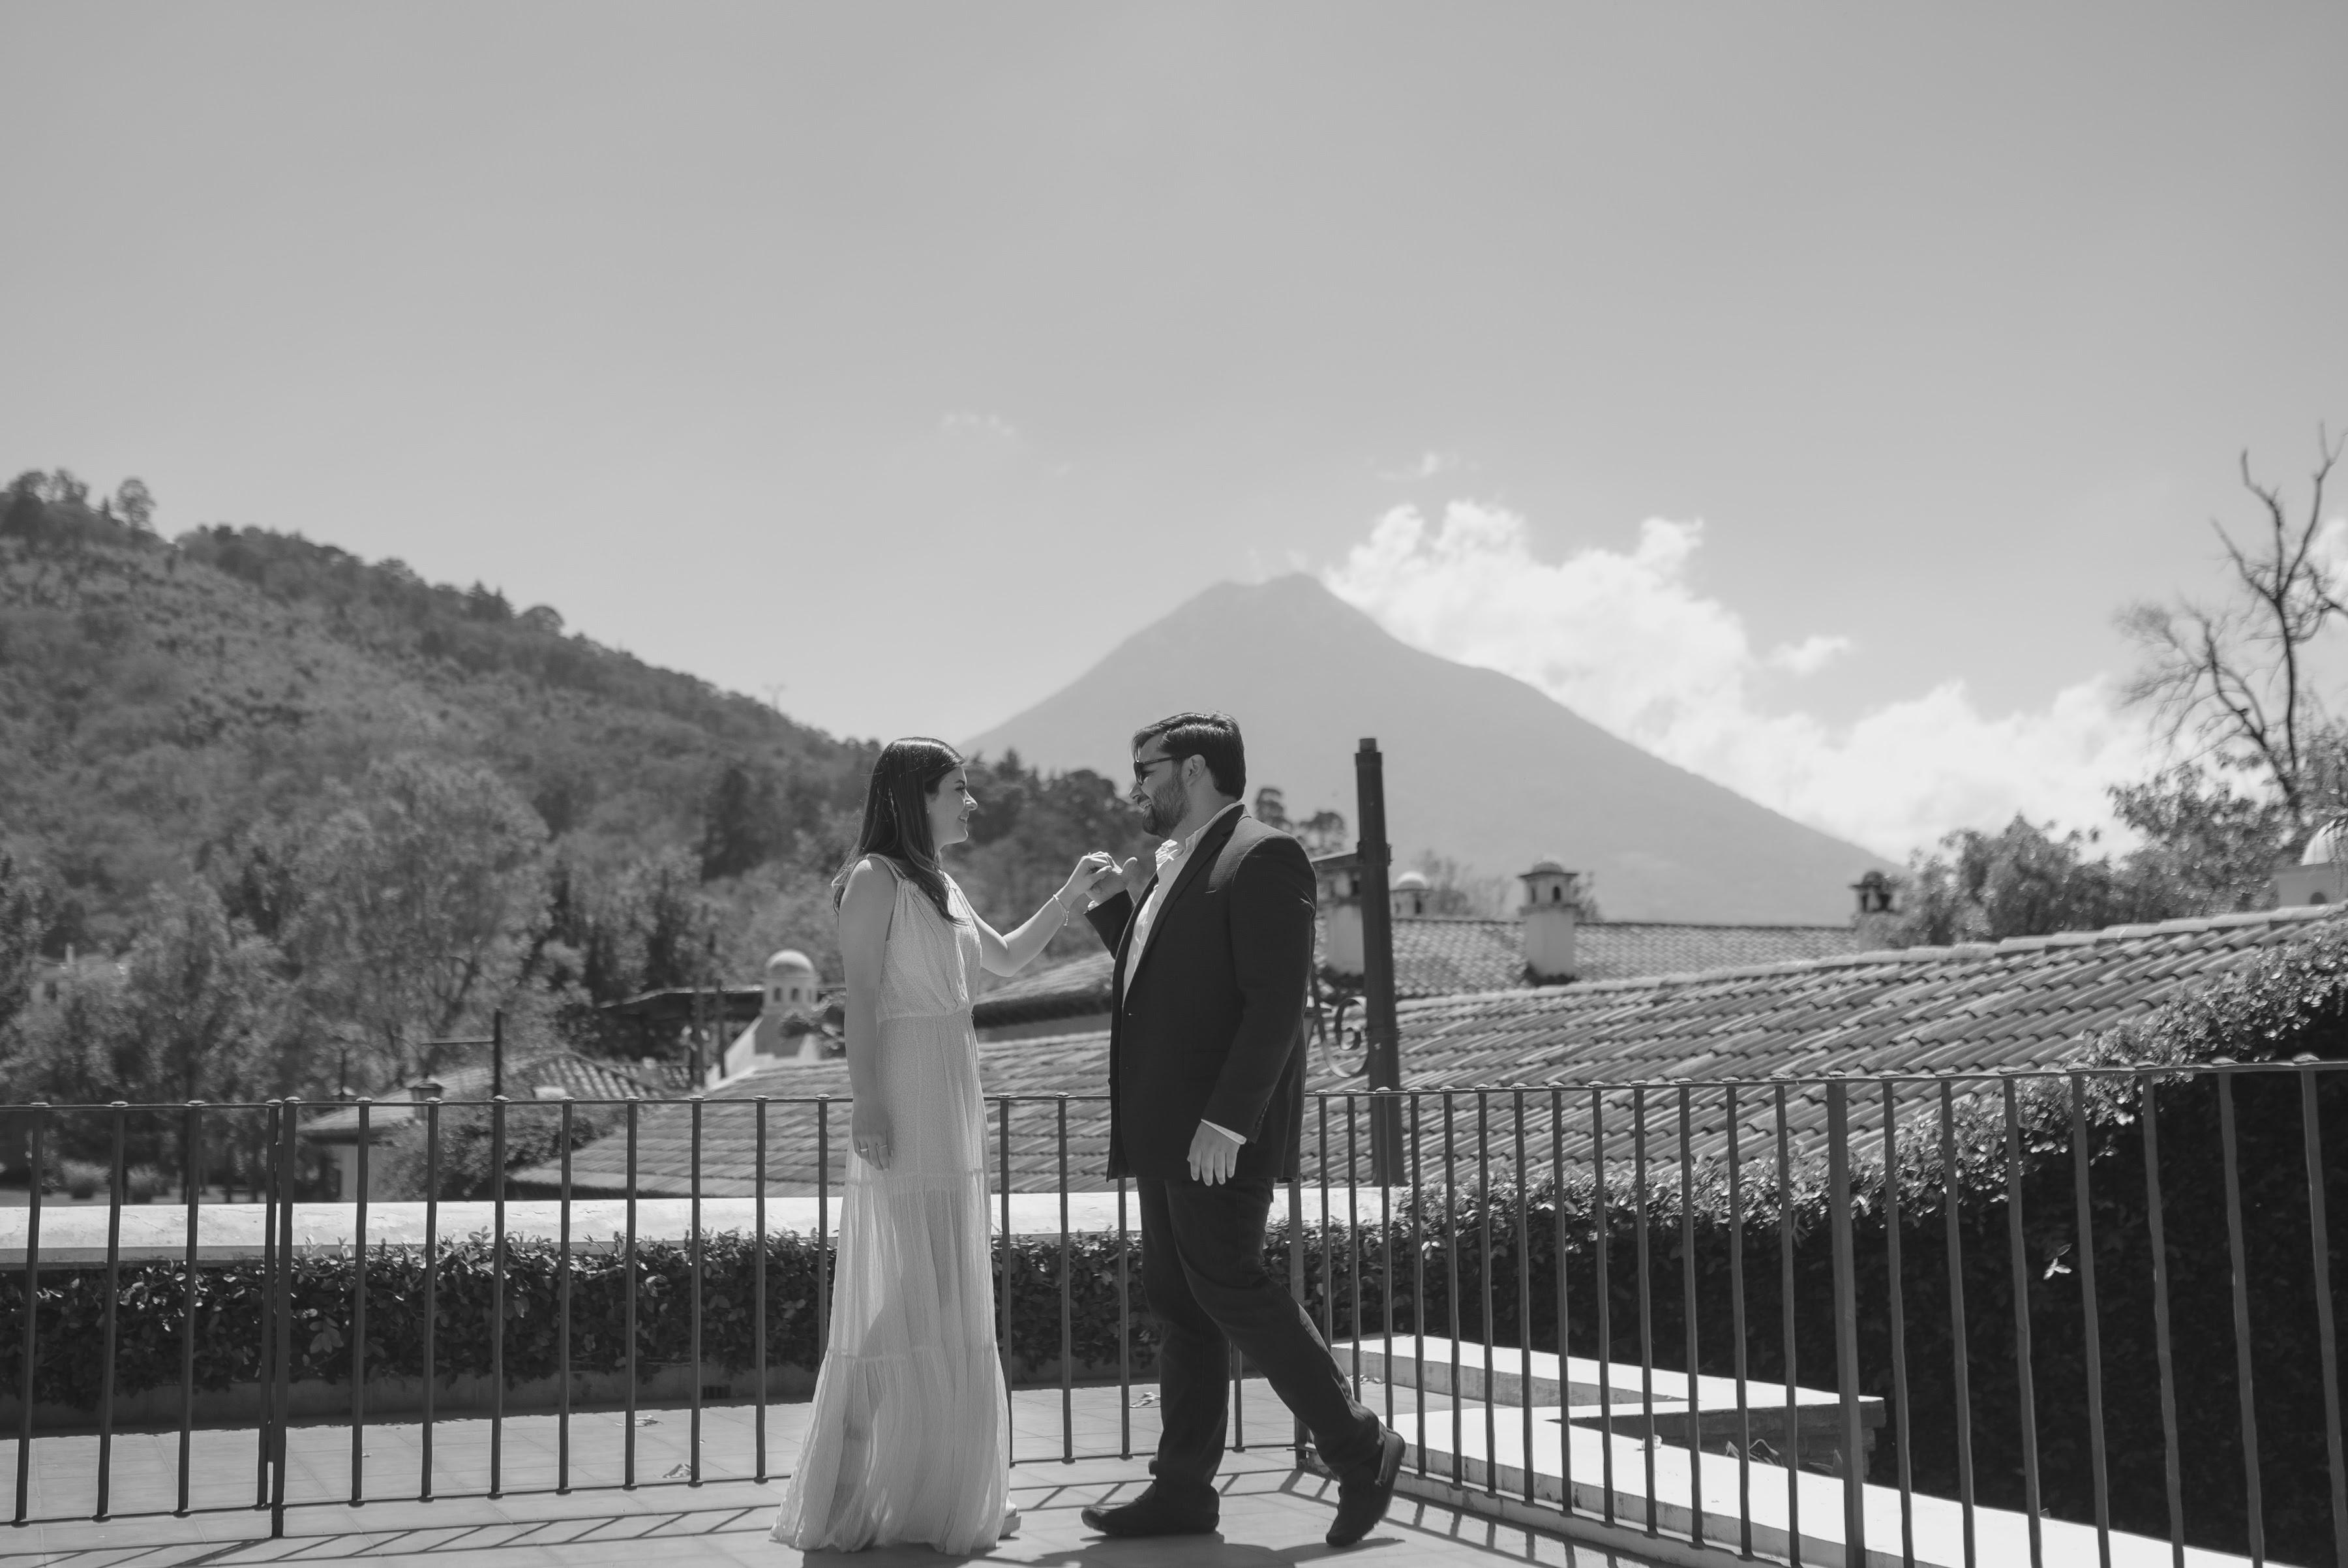 The Wedding Website of Marinés Chinchilla and Juan Diego Arizpe